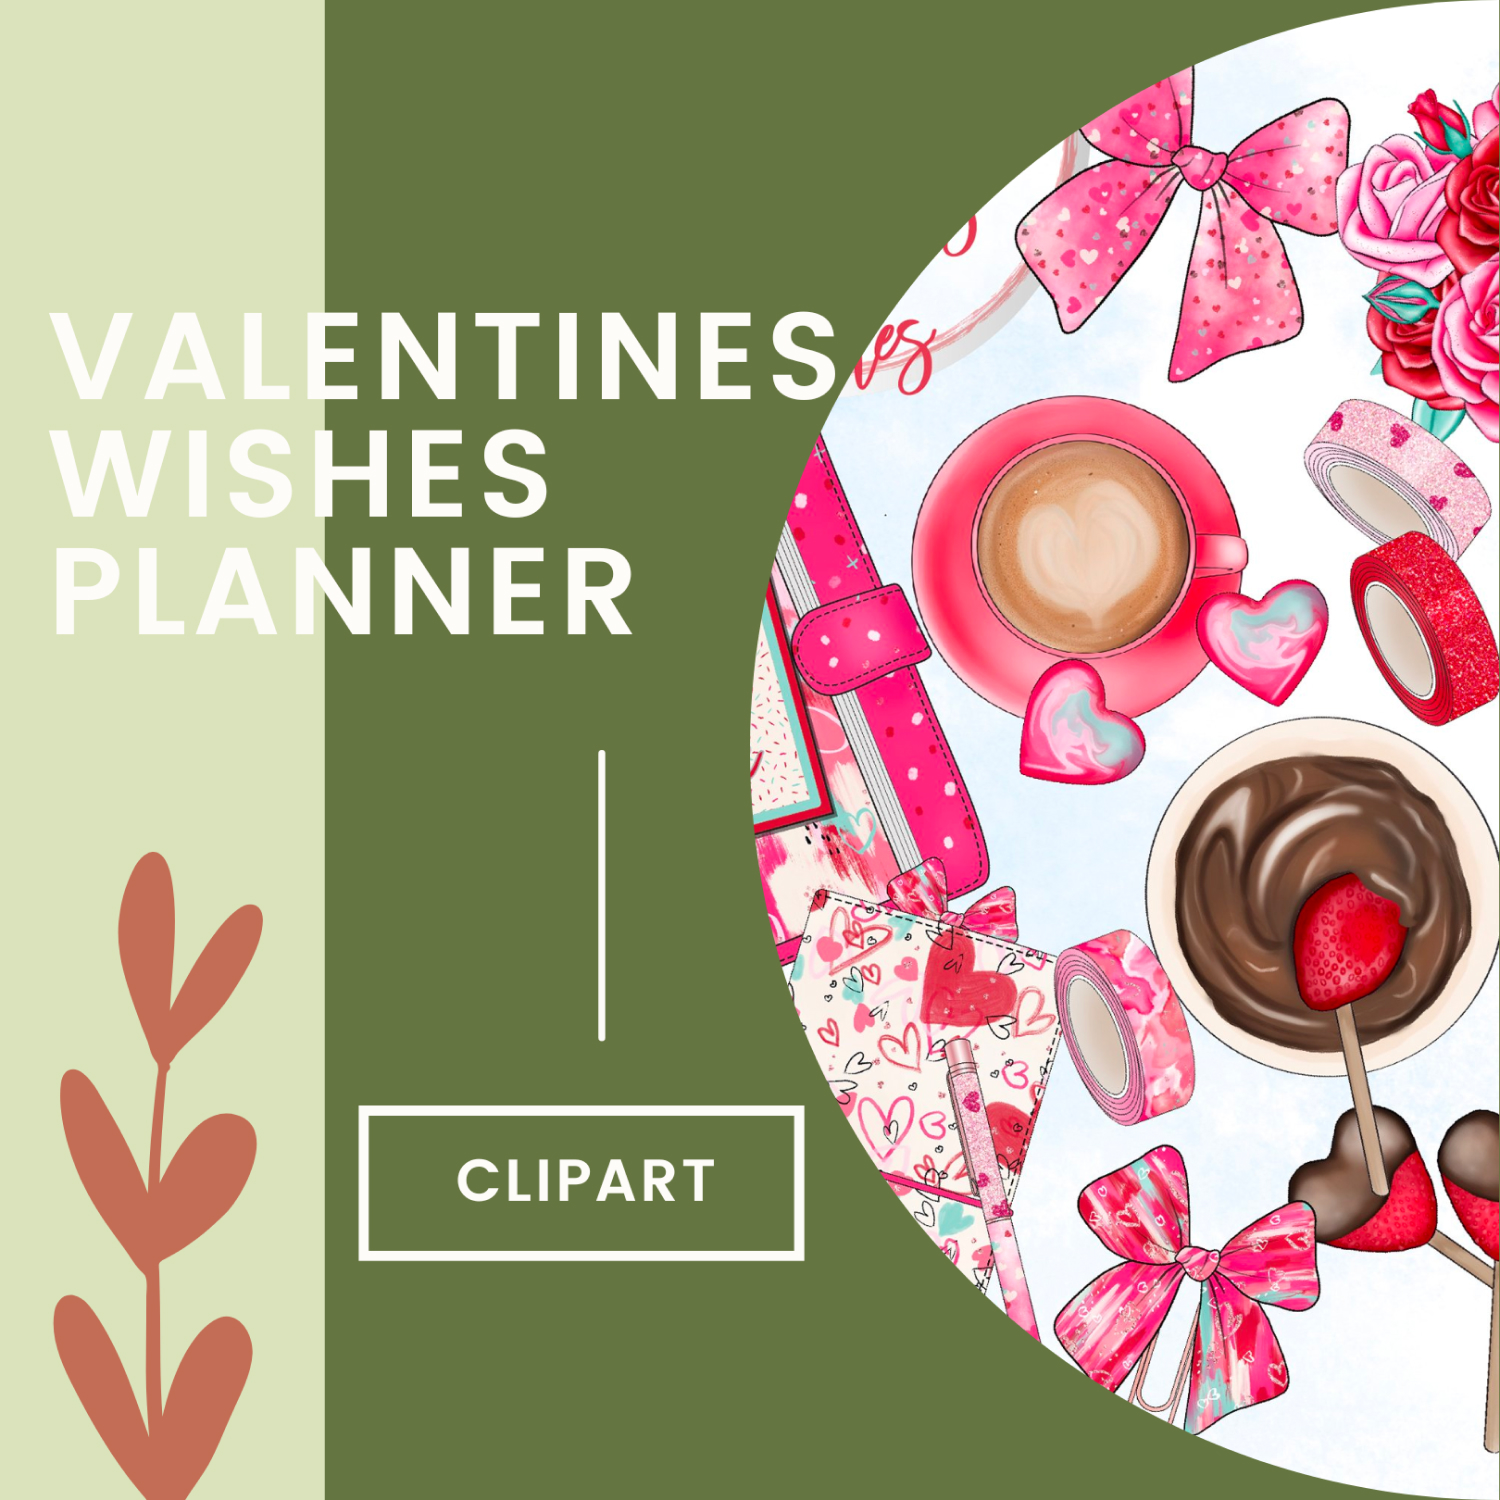 Illustration preview valentines wishes planner clipart.